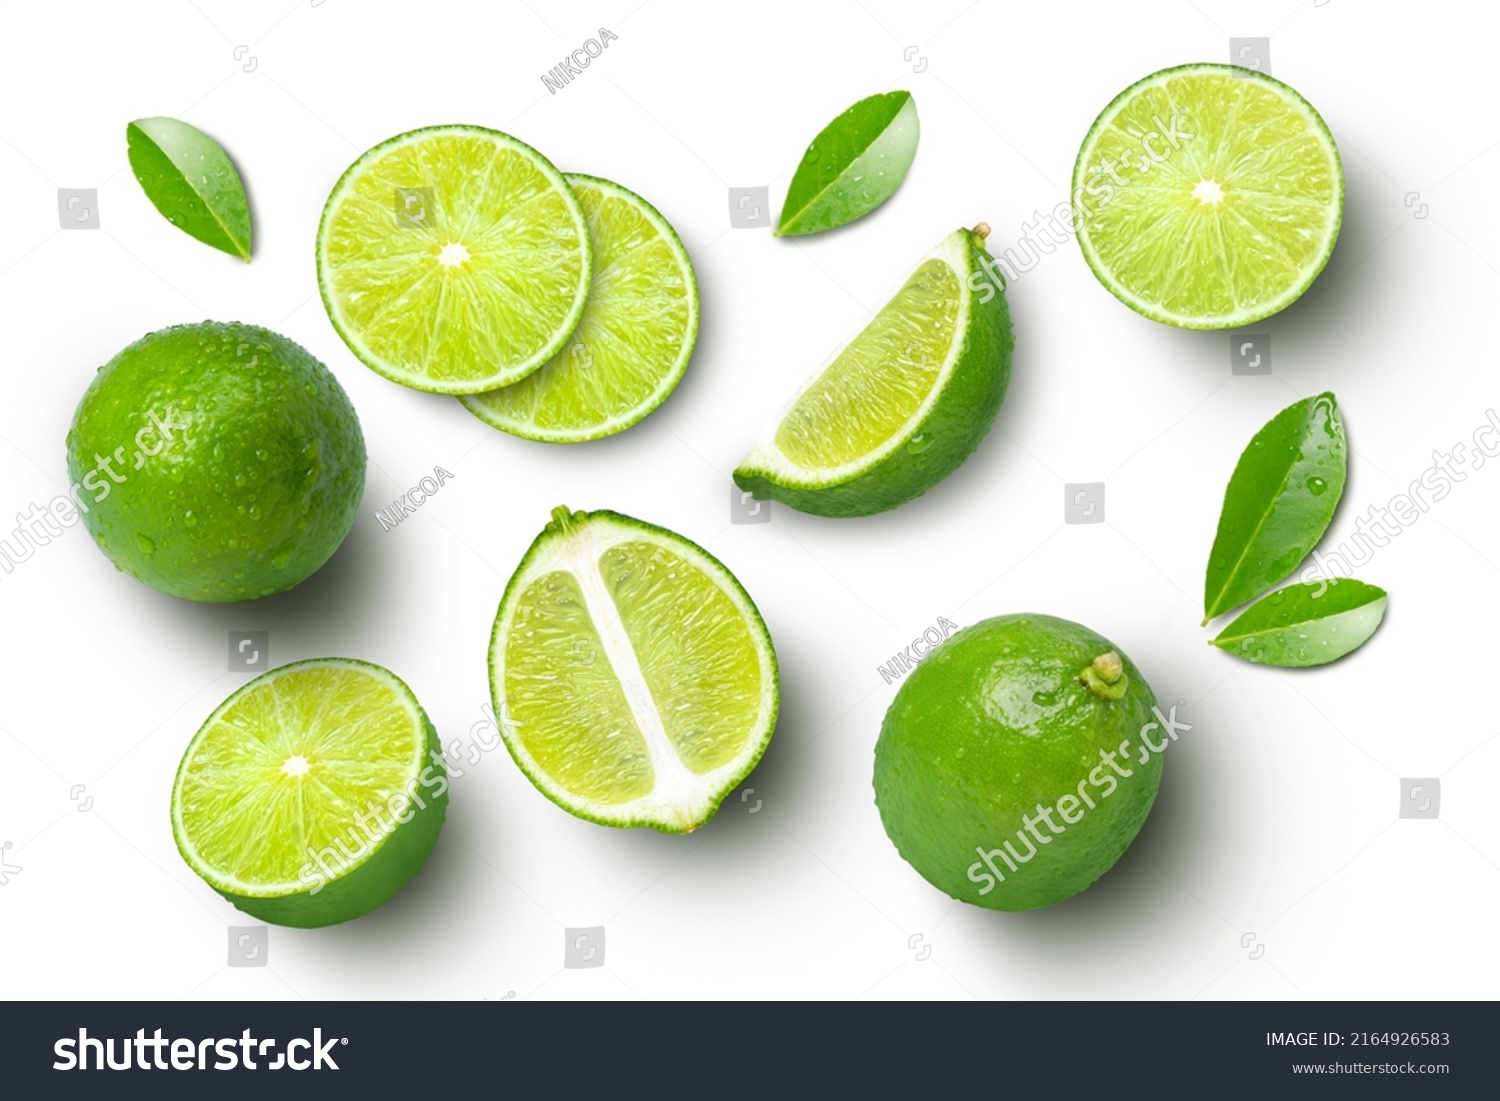 Lime fruits with slices and green leaves isolated on white background. Top view. Flat lay. #2164926583